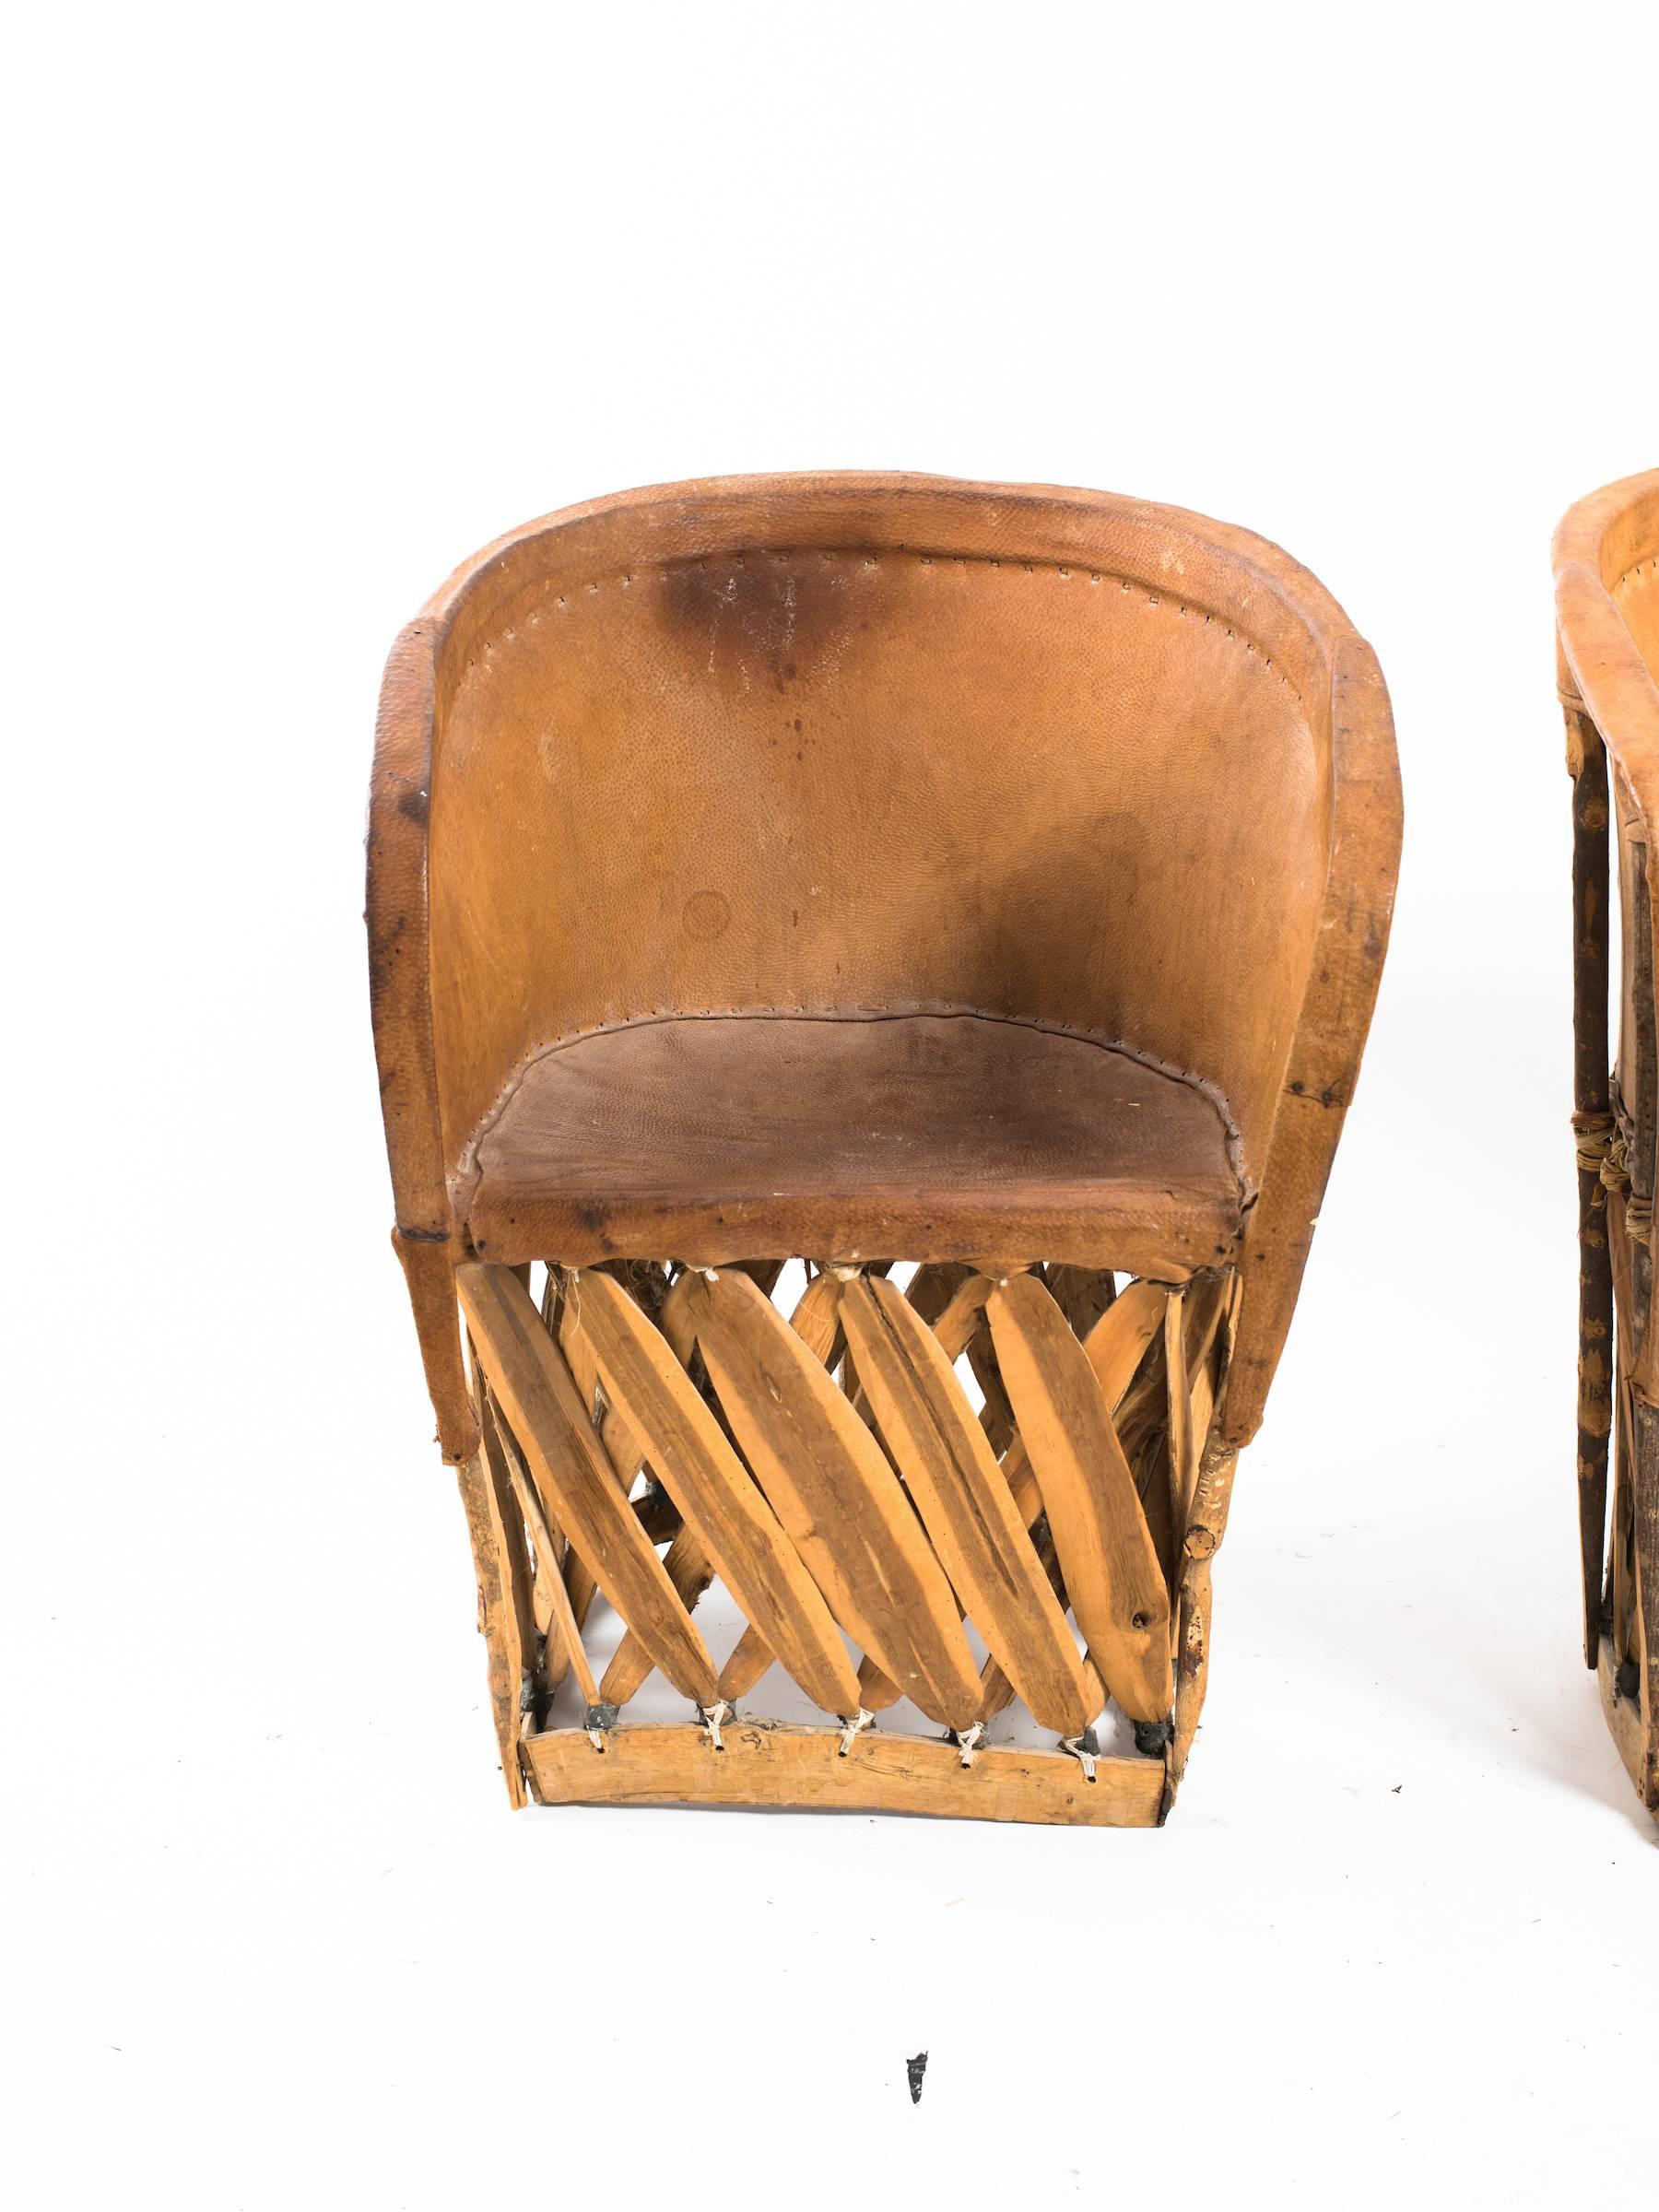 Four leather safari chairs from the 1970s.